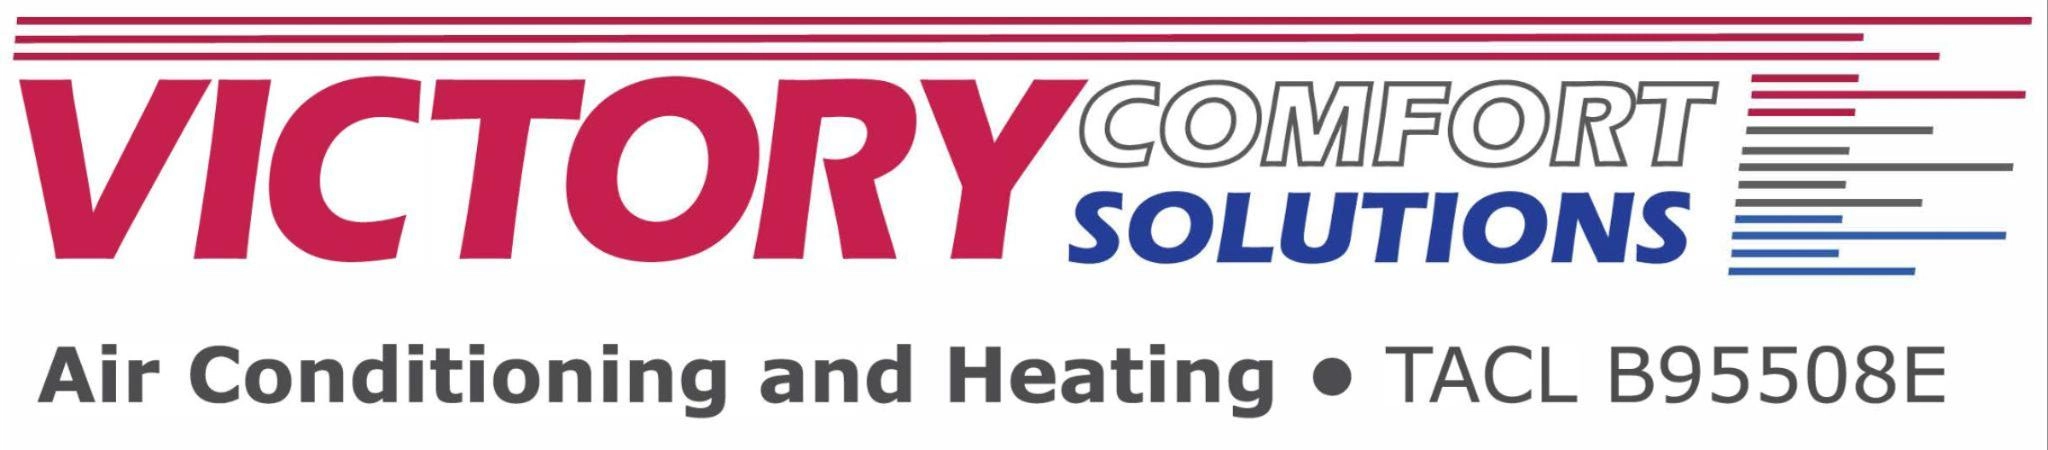 Victory Comfort Solutions Logo